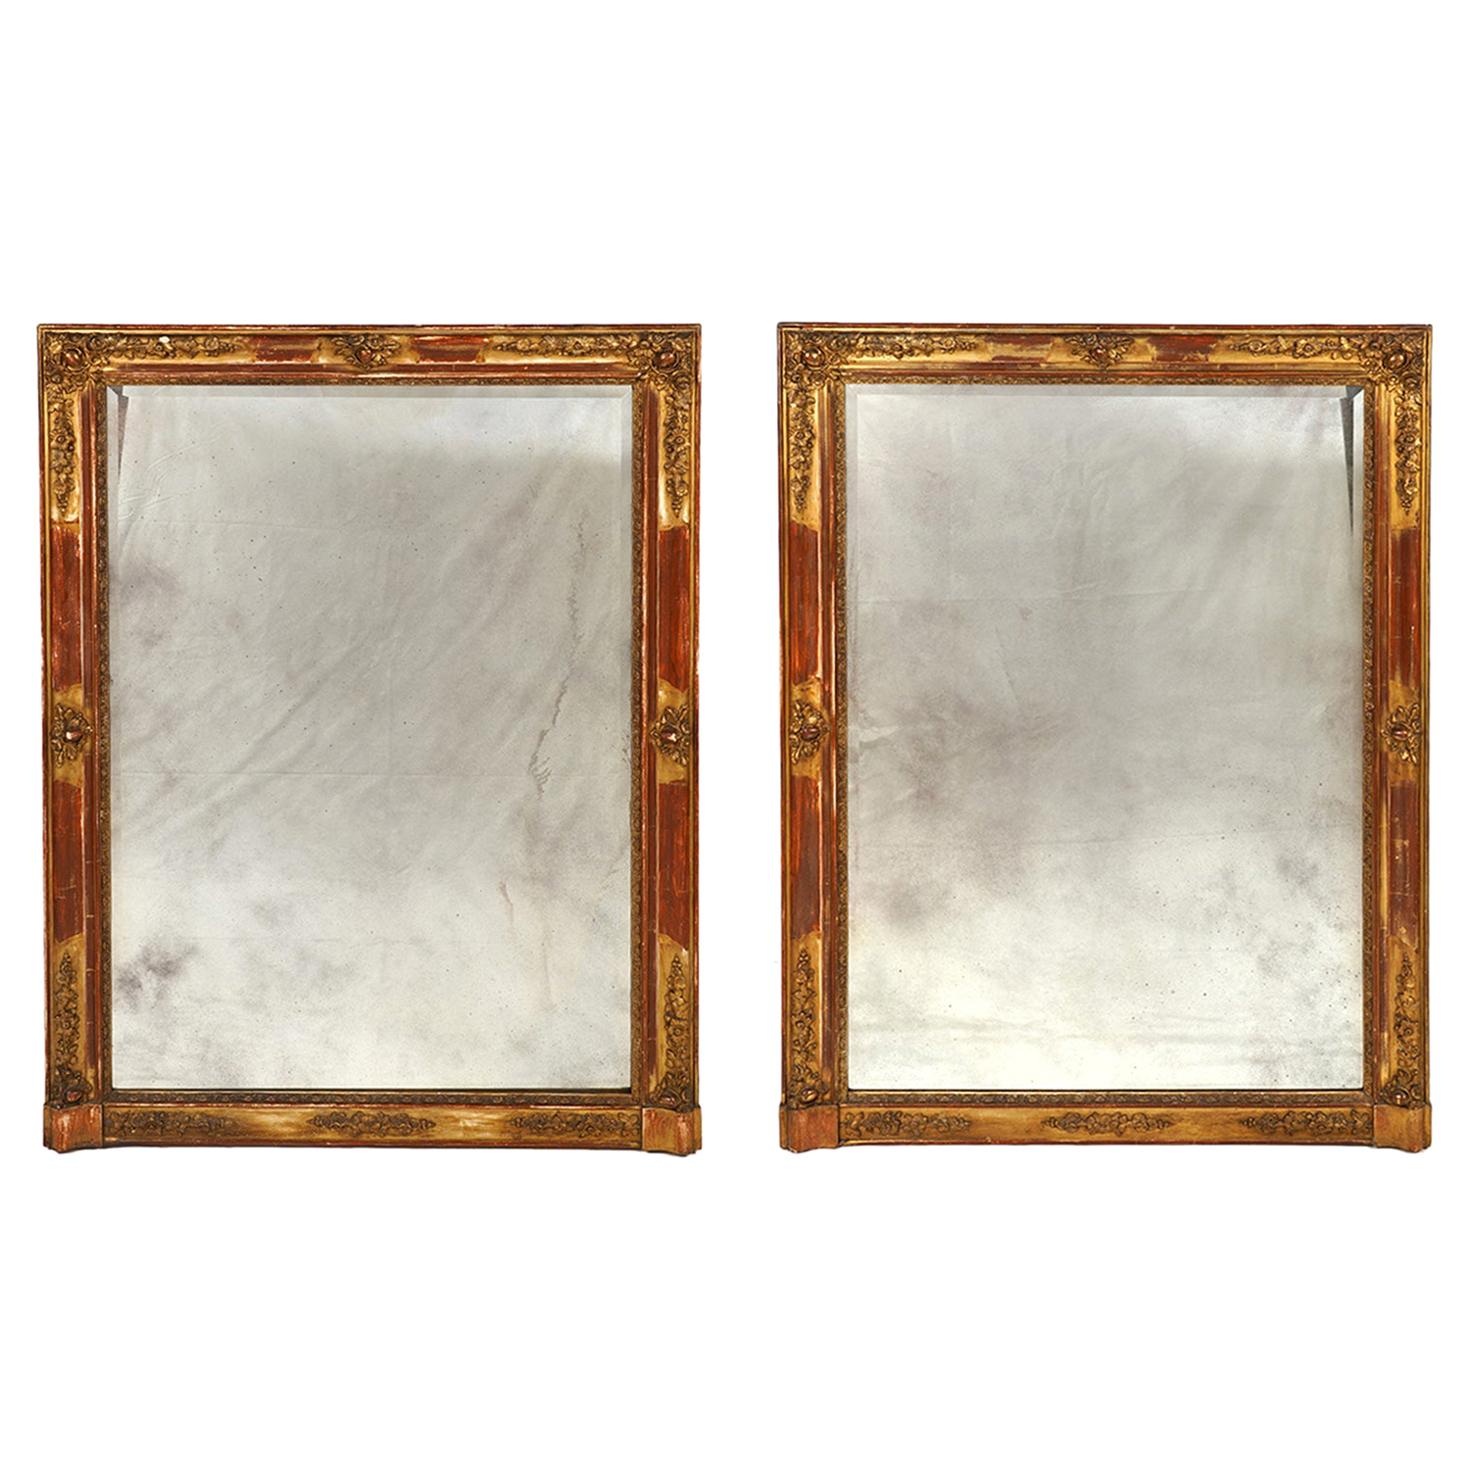 Pair of French Napoleon III Decorated Giltwood Wall Mirrors, circa 1870